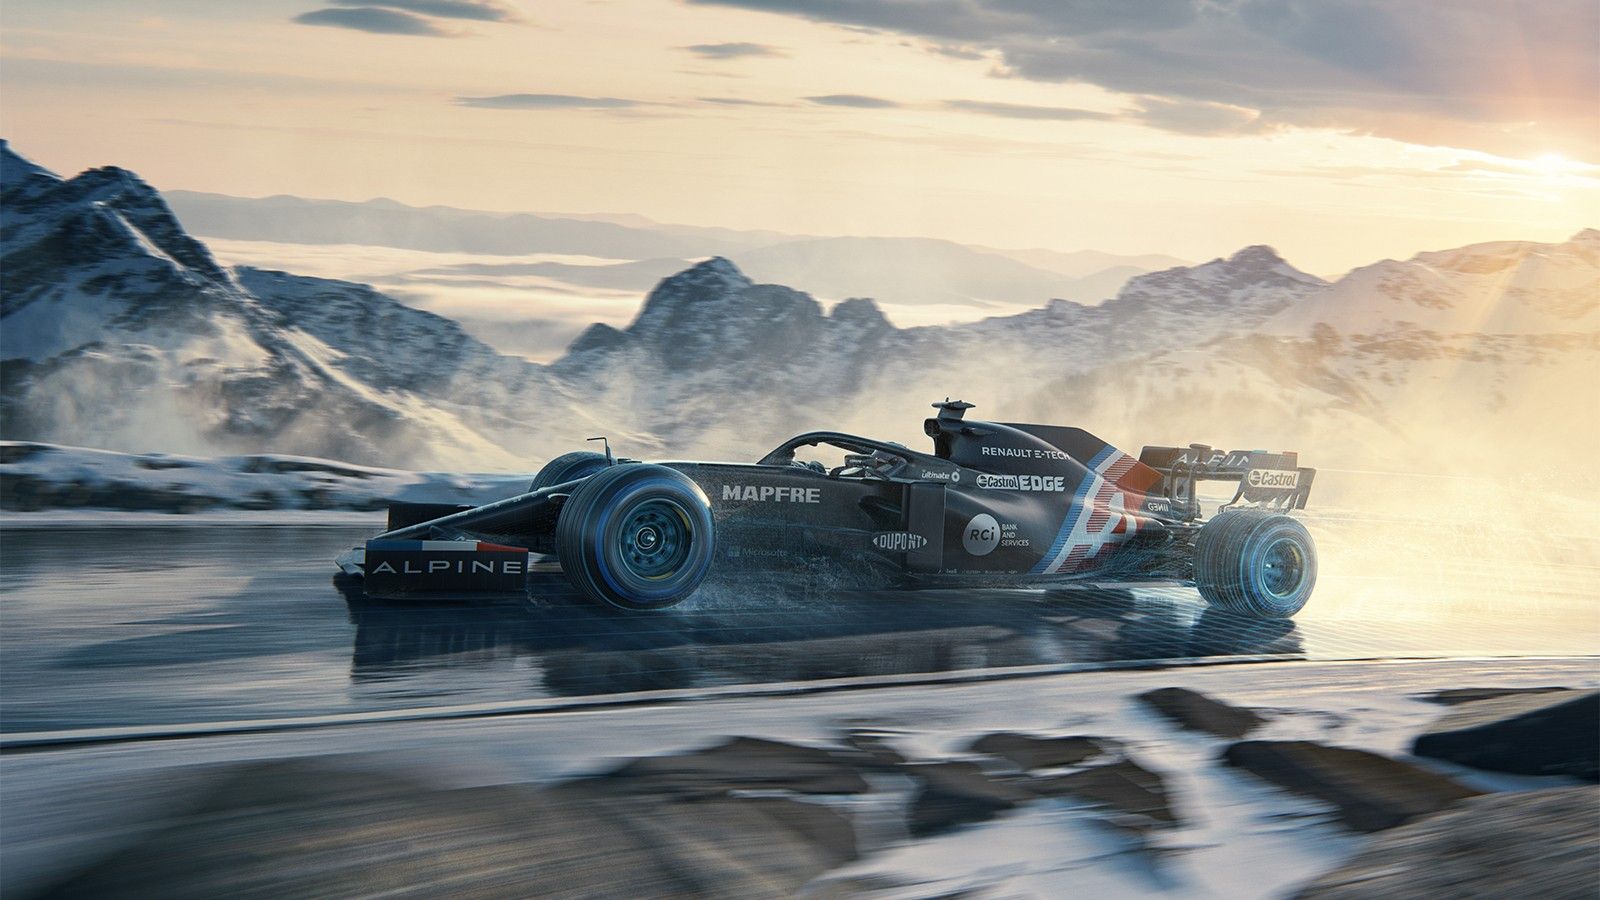 Alpine set date to launch the team's first F1 car after rebranding from Renault. Formula 1®